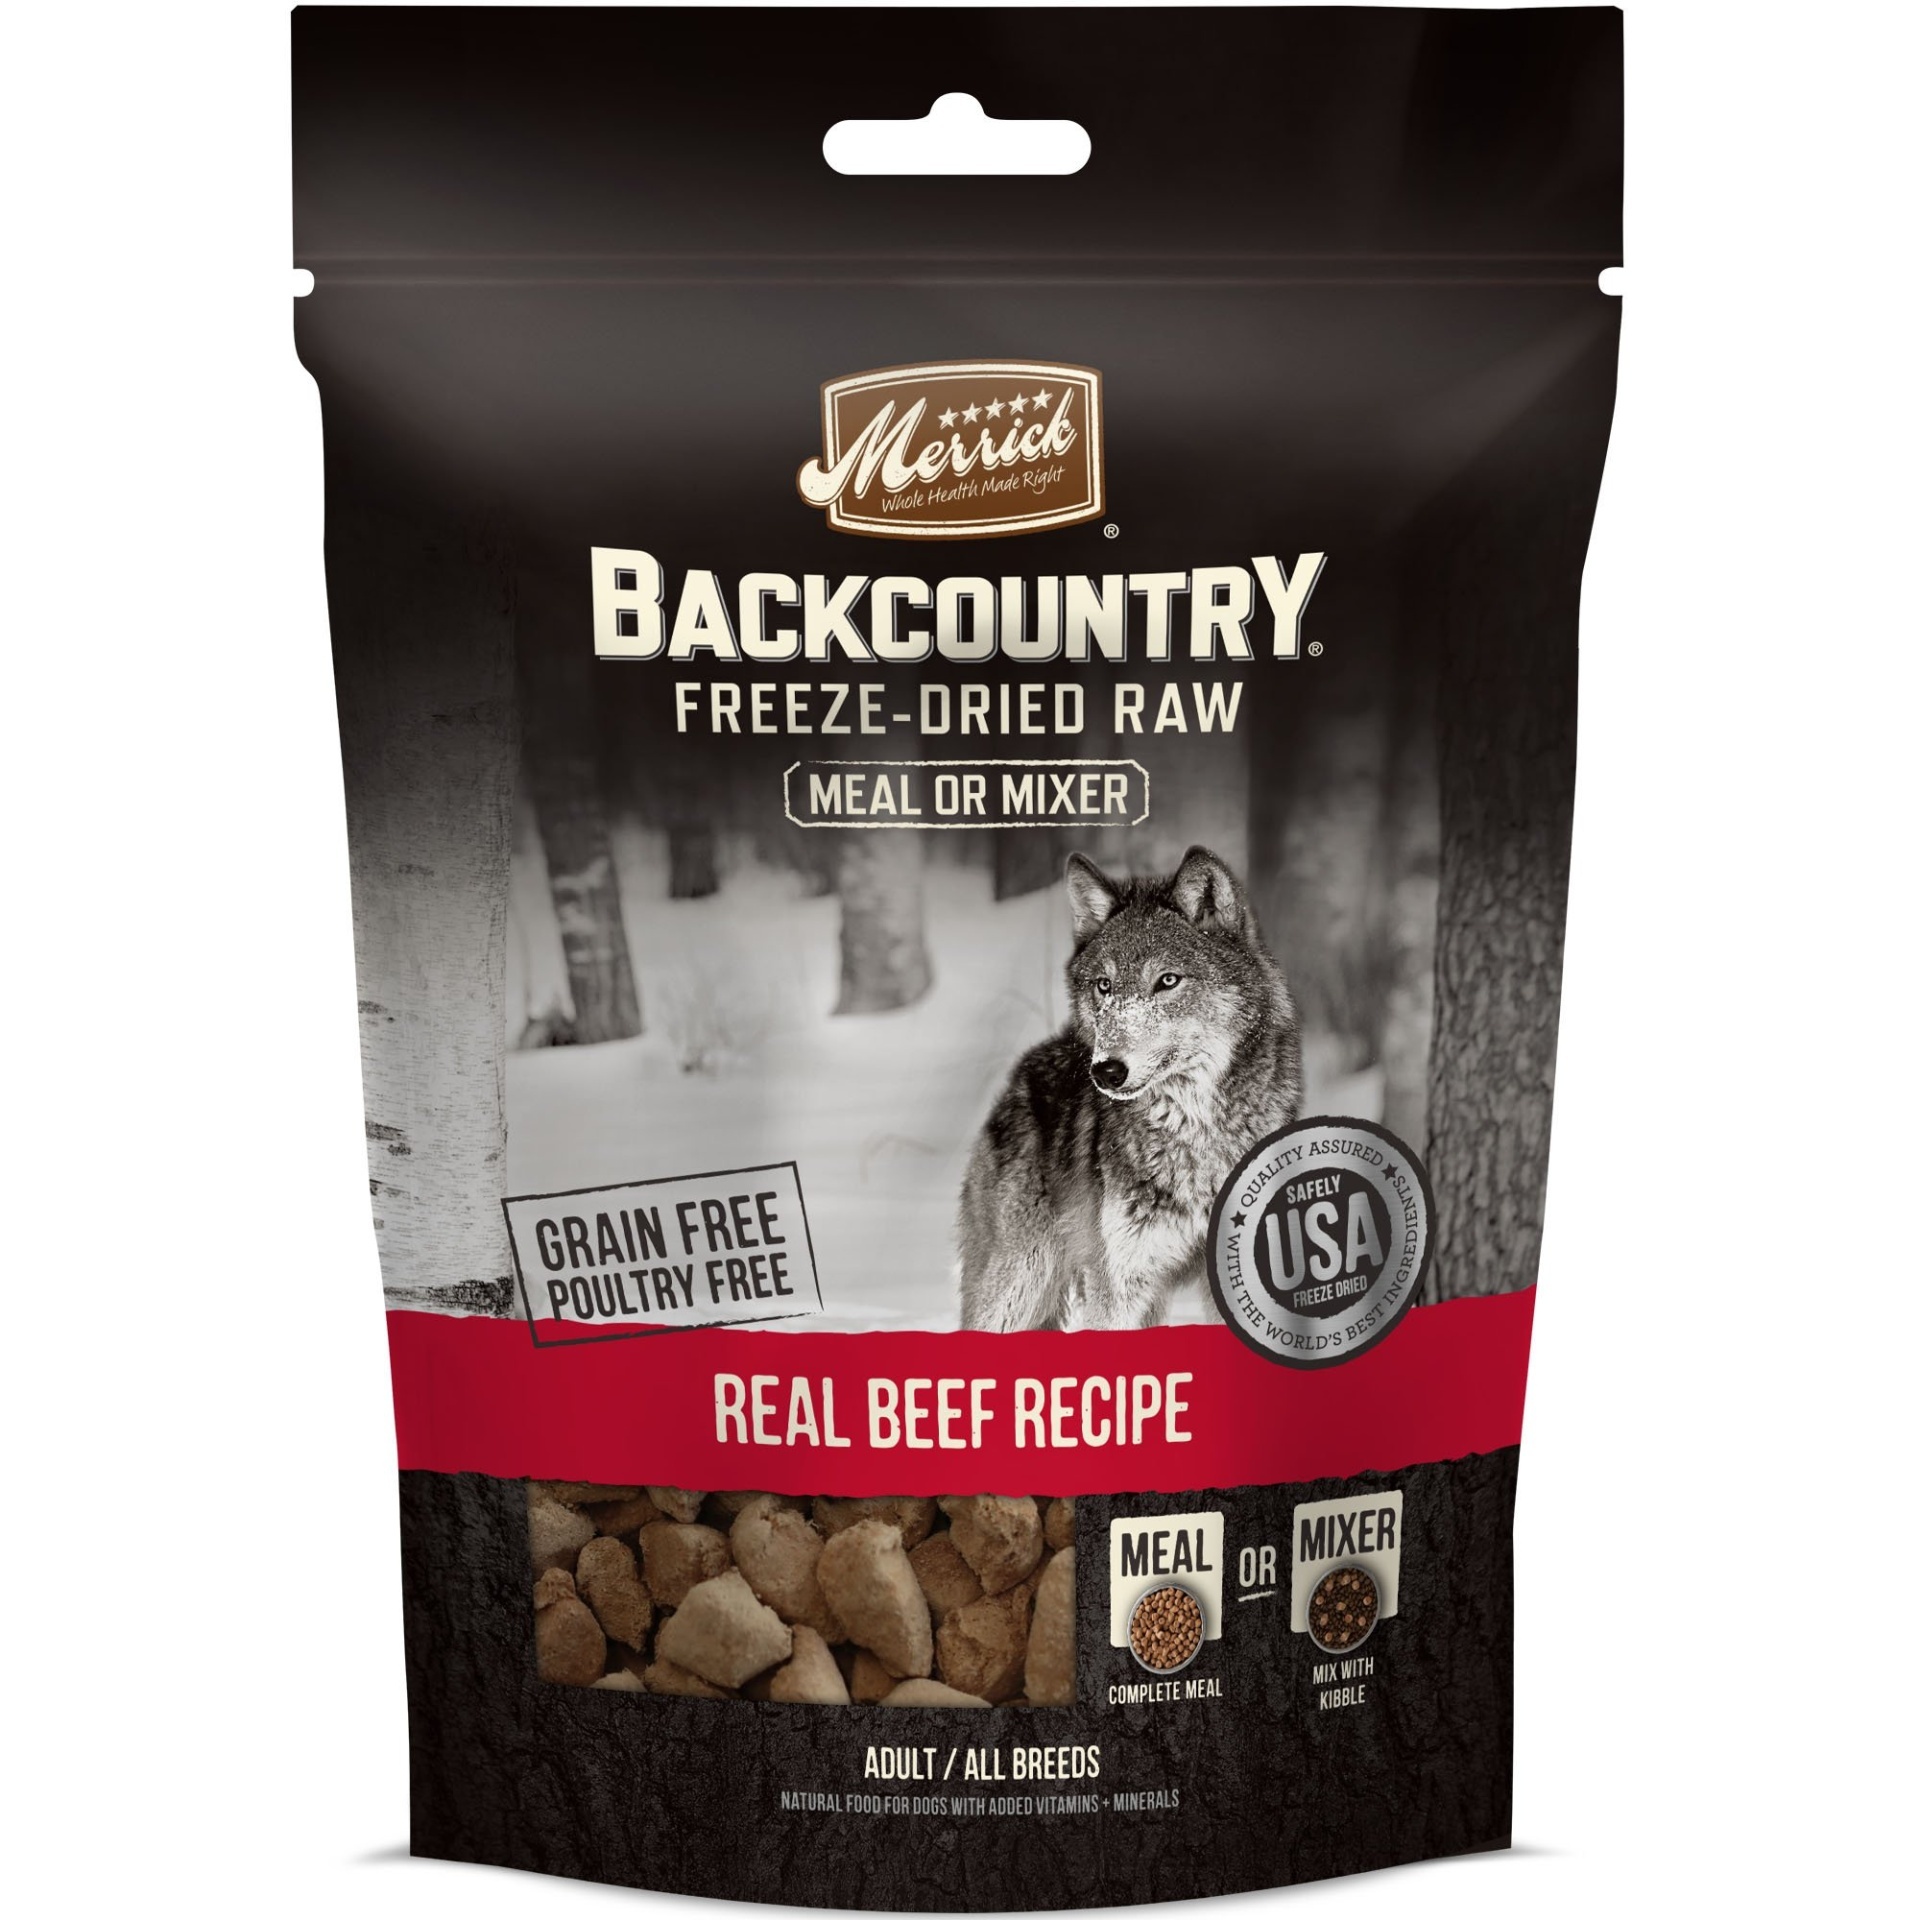 slide 1 of 1, Merrick Backcountry Freeze-Dried Raw Real Beef Recipe Meal Or Mixer Grain Free Adult Dog Food, 5.5 oz